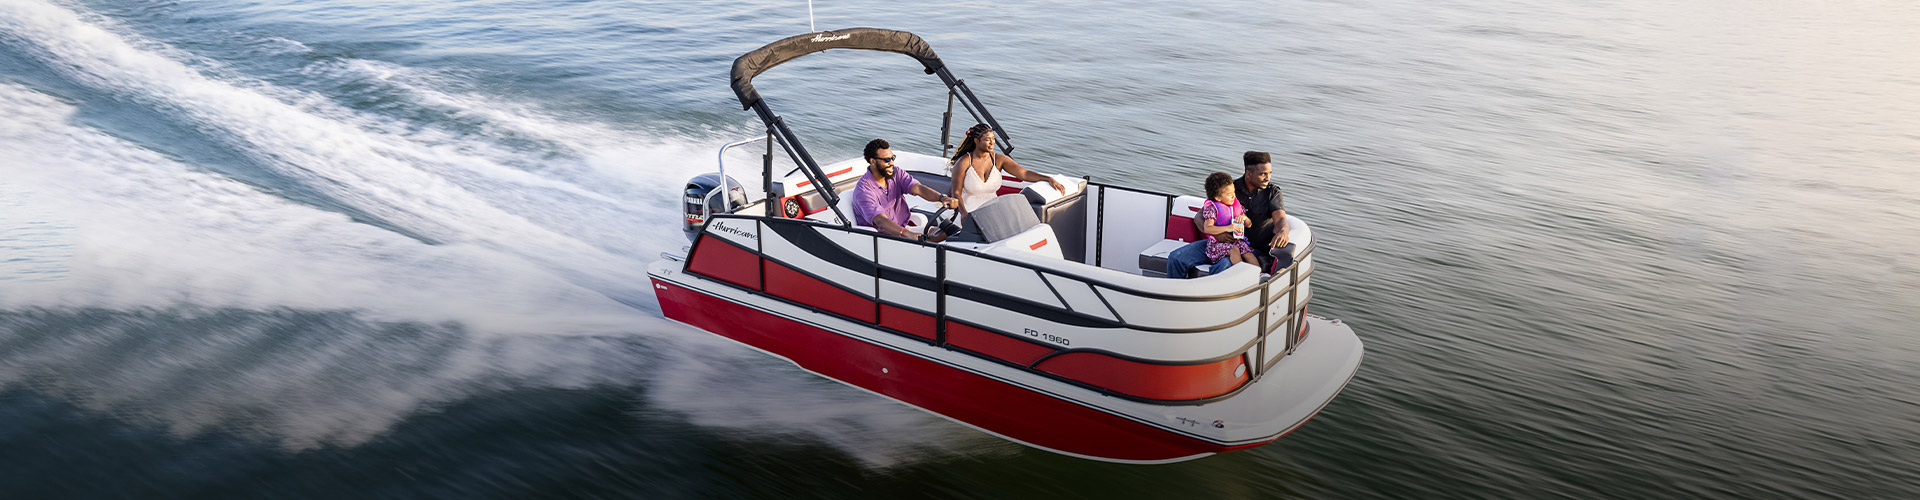 Creative and Affordable DIY Pontoon Boat Ideas